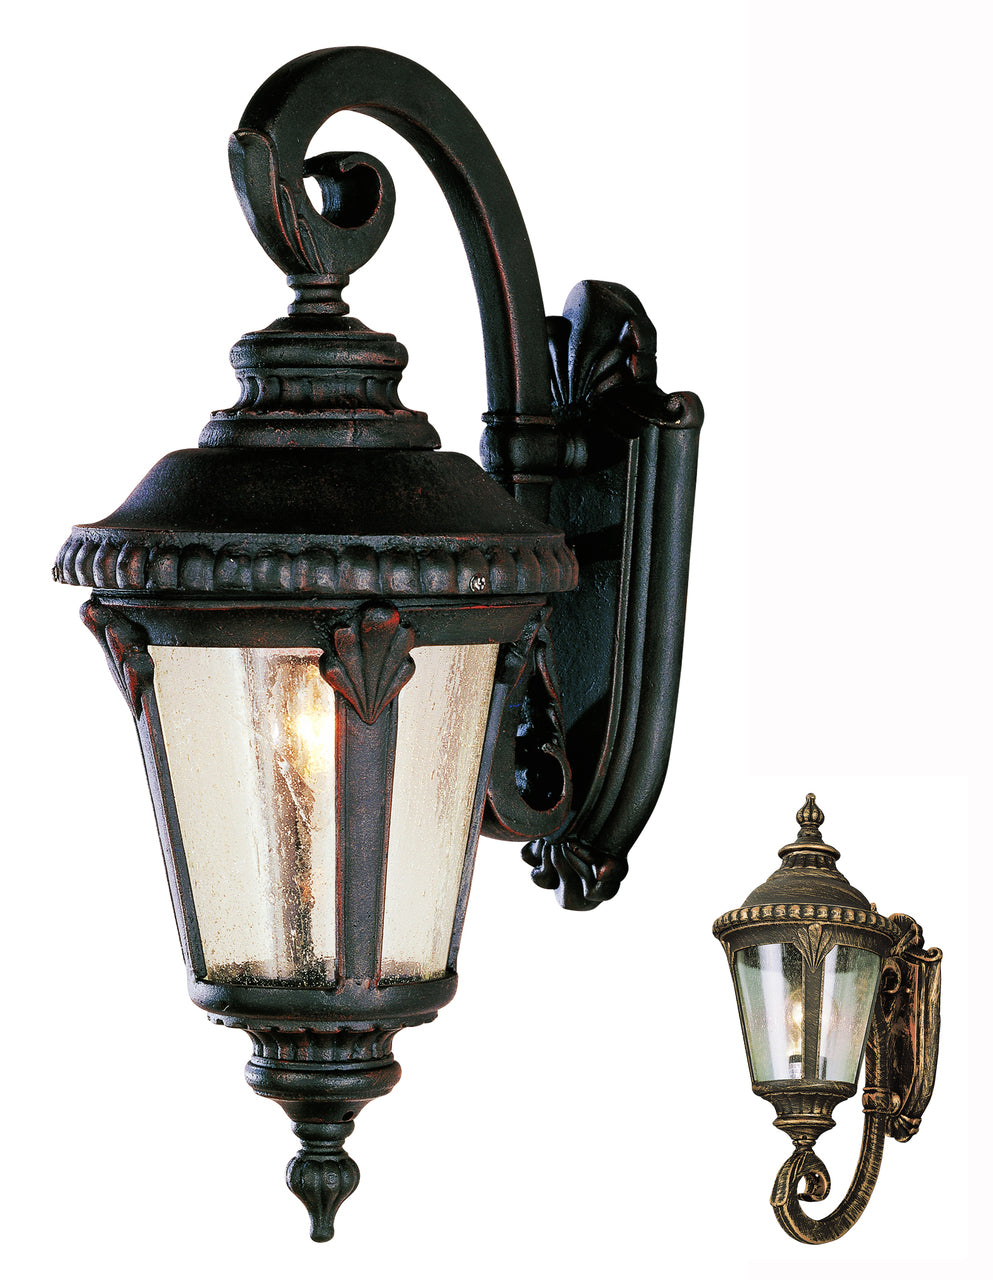 Trans Globe Lighting 5043 BC Commons 19" Outdoor Black Copper Tuscan Wall Lantern with Braided Crown Trim and Leaf Window Accents